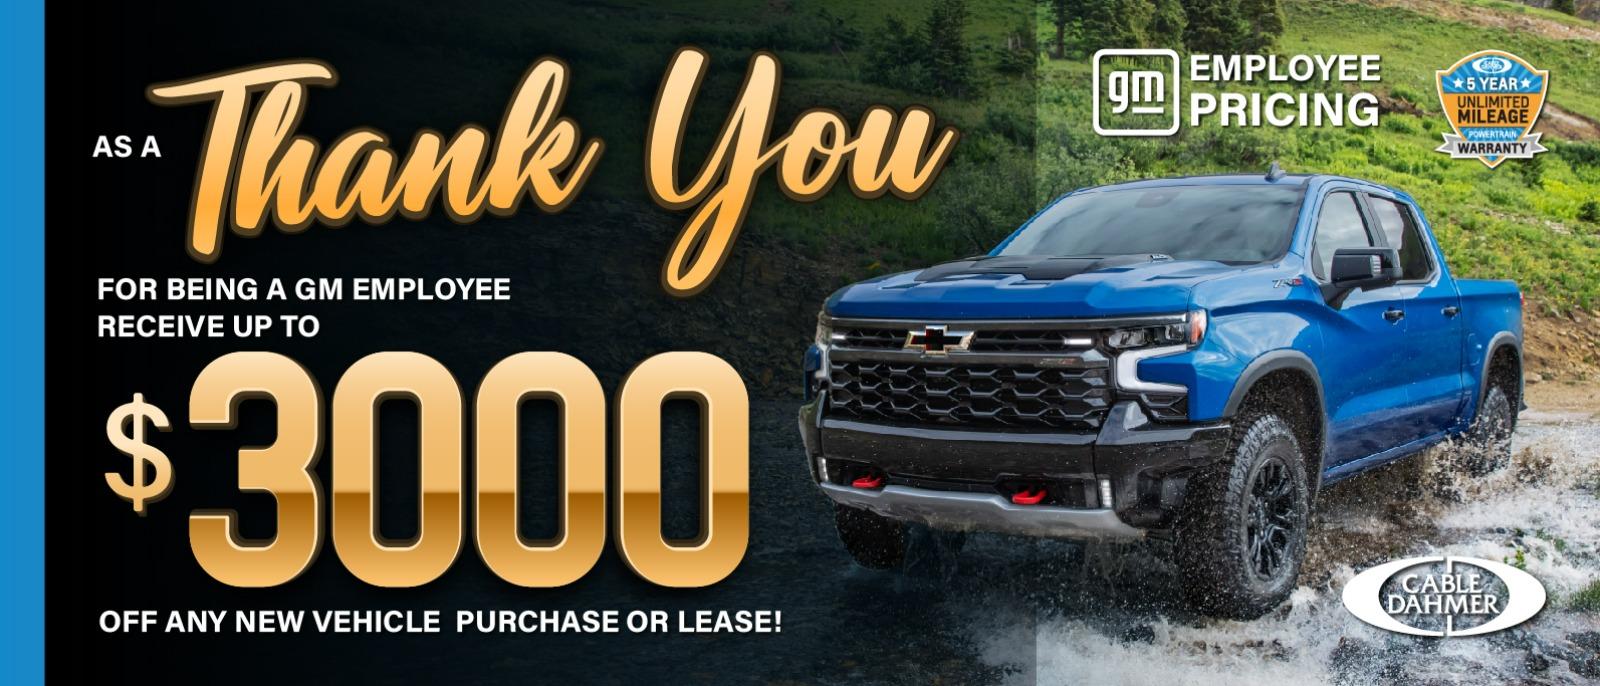 Get up to $3,000 off a new car, truck, or SUV.